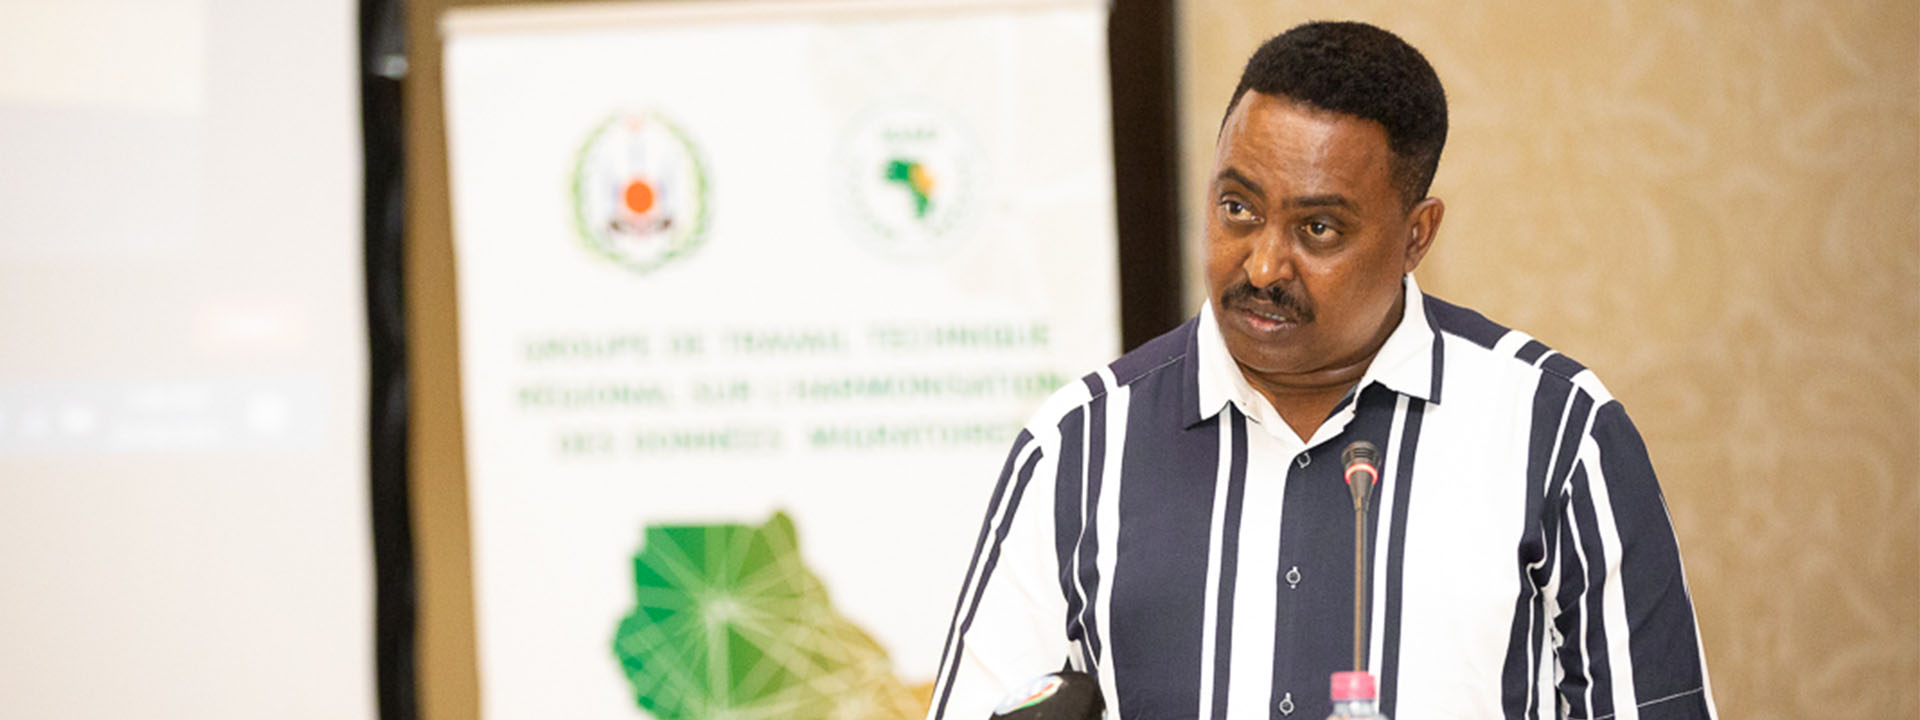 Official Statement by Dr. Workneh Gebeyehu, IGAD Executive Secretary At The Launch of the 1st IGAD Migration Statistics Report 28th April 2022 Djibouti, Republic of Djibouti